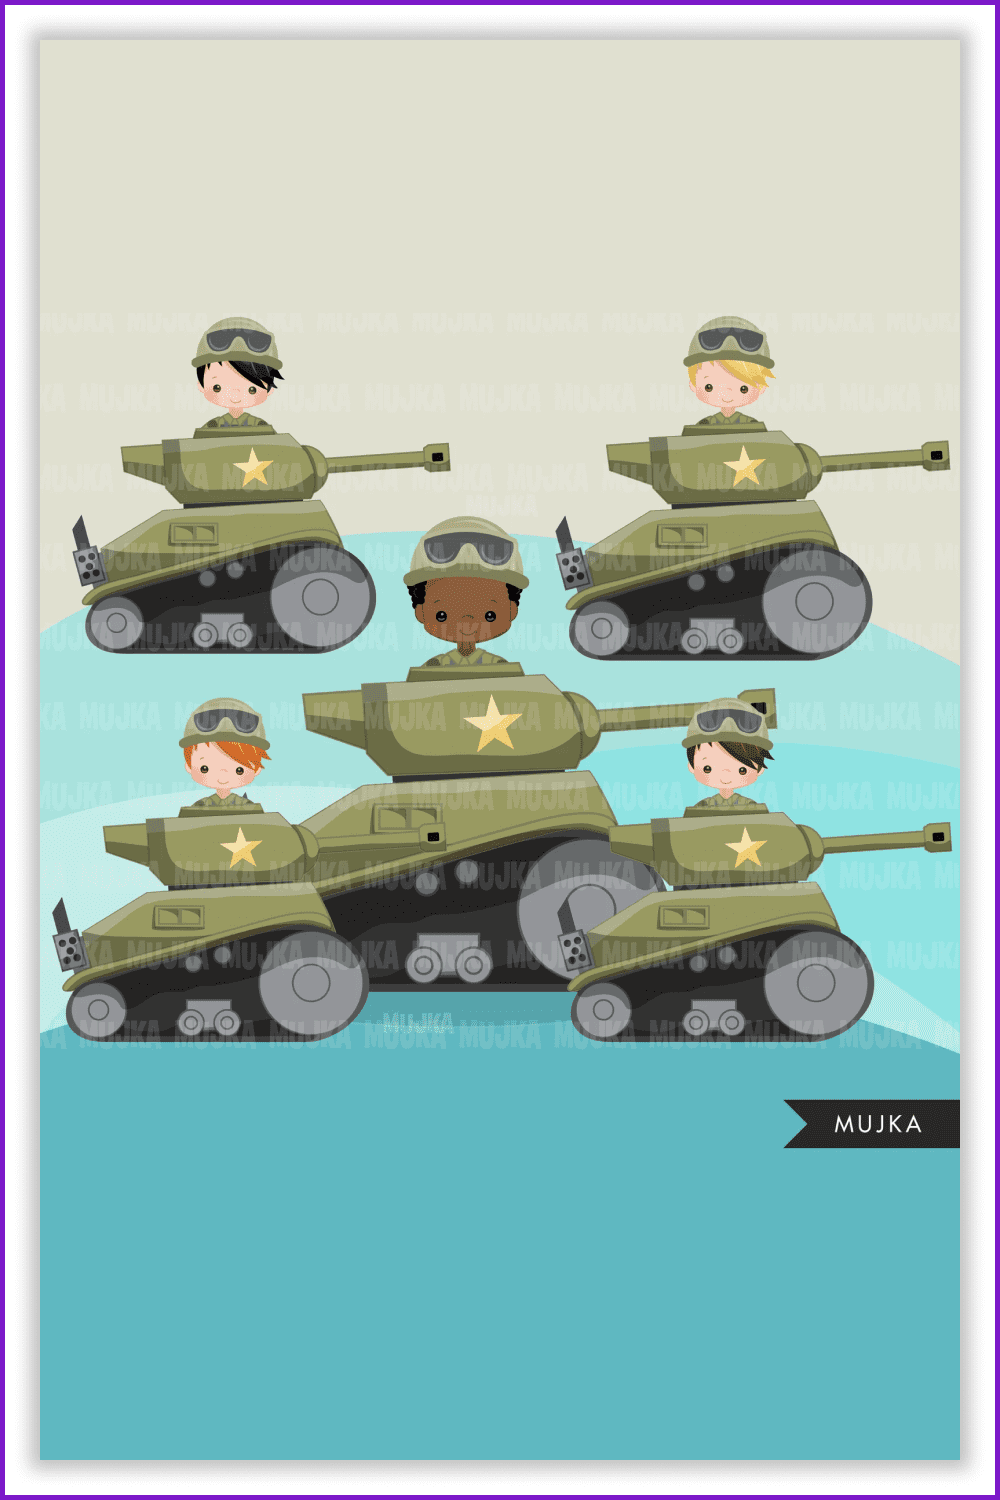 Drawing of children in small tanks with a yellow star.